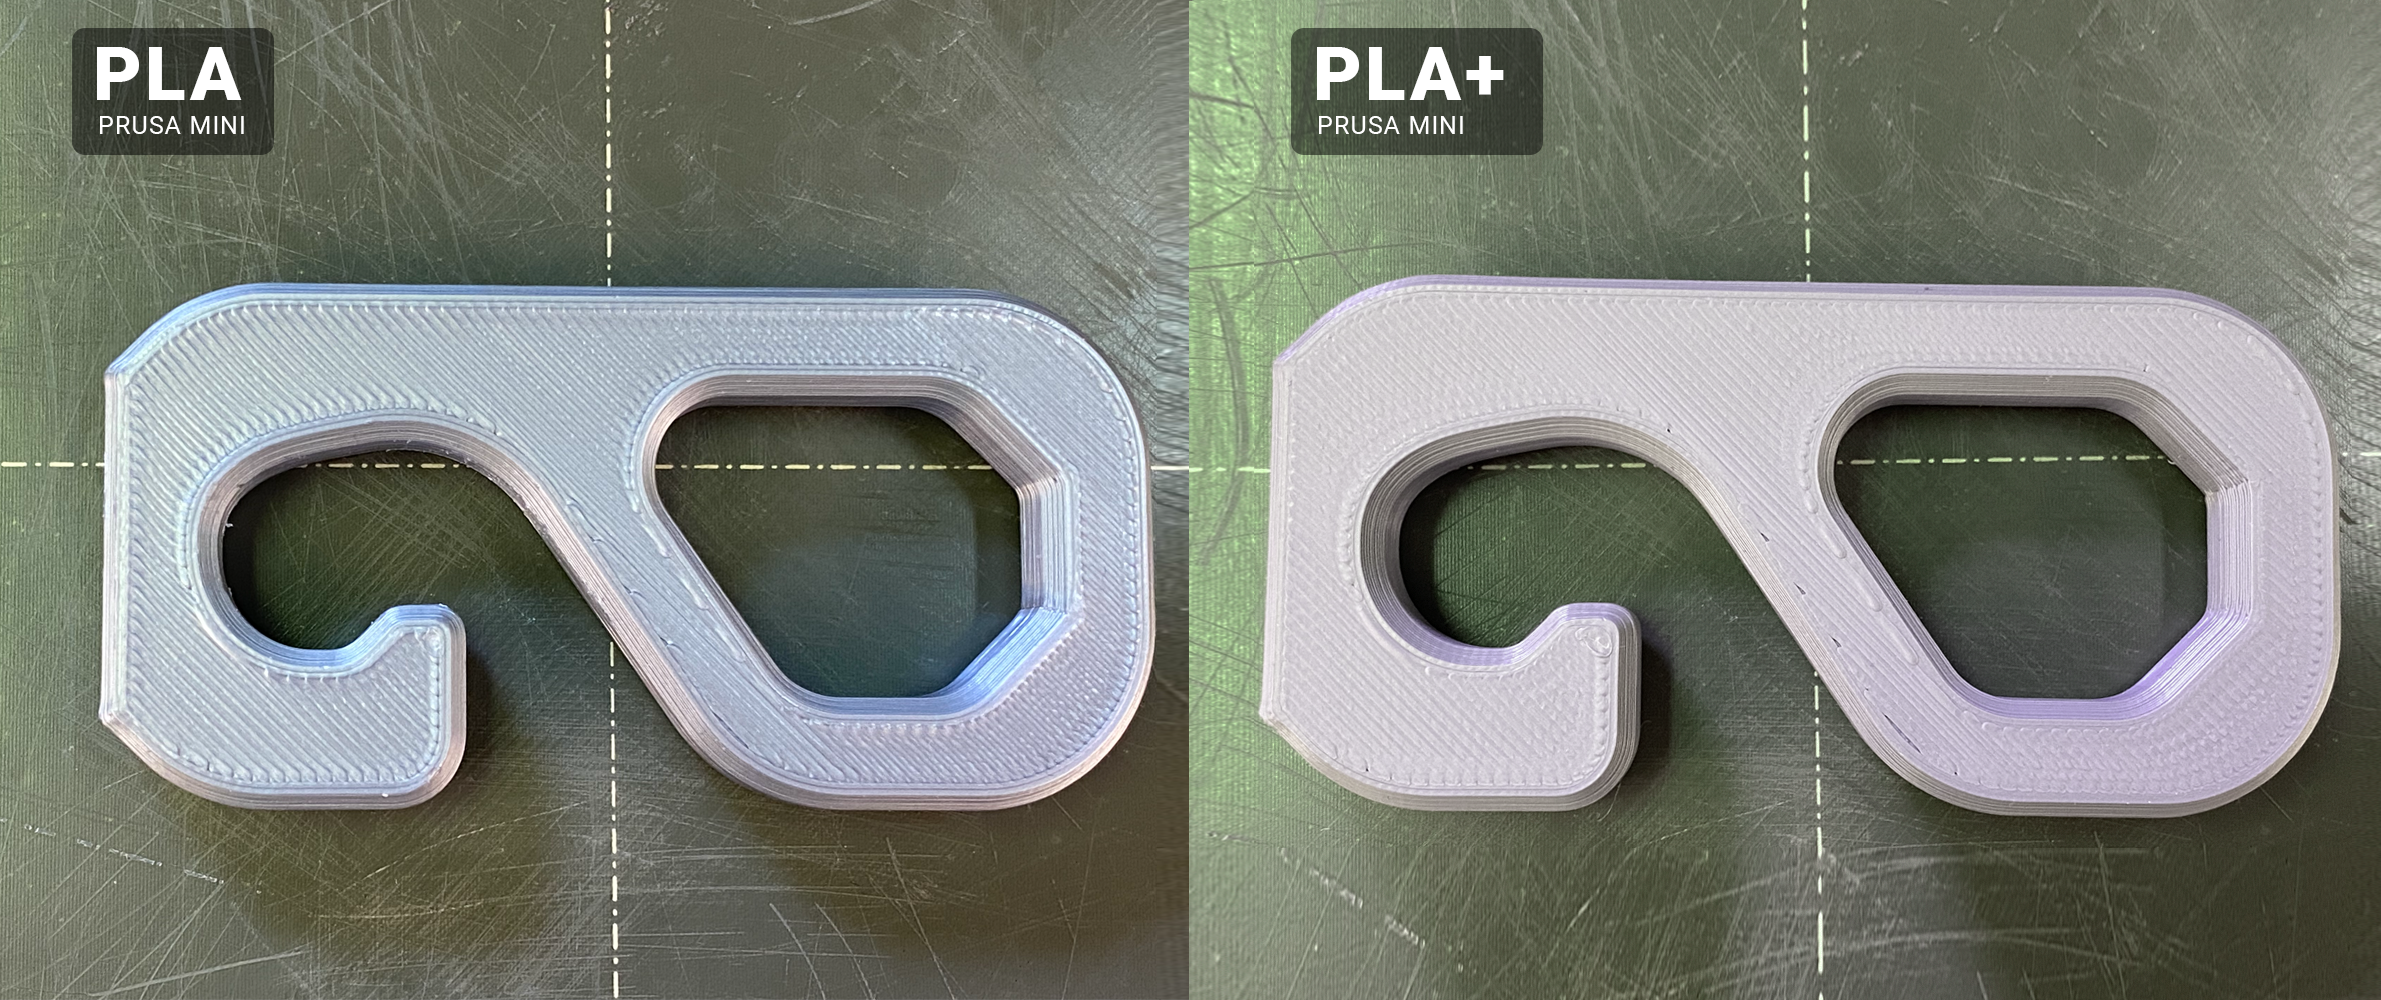 Difference between PLA and PLA+ filament